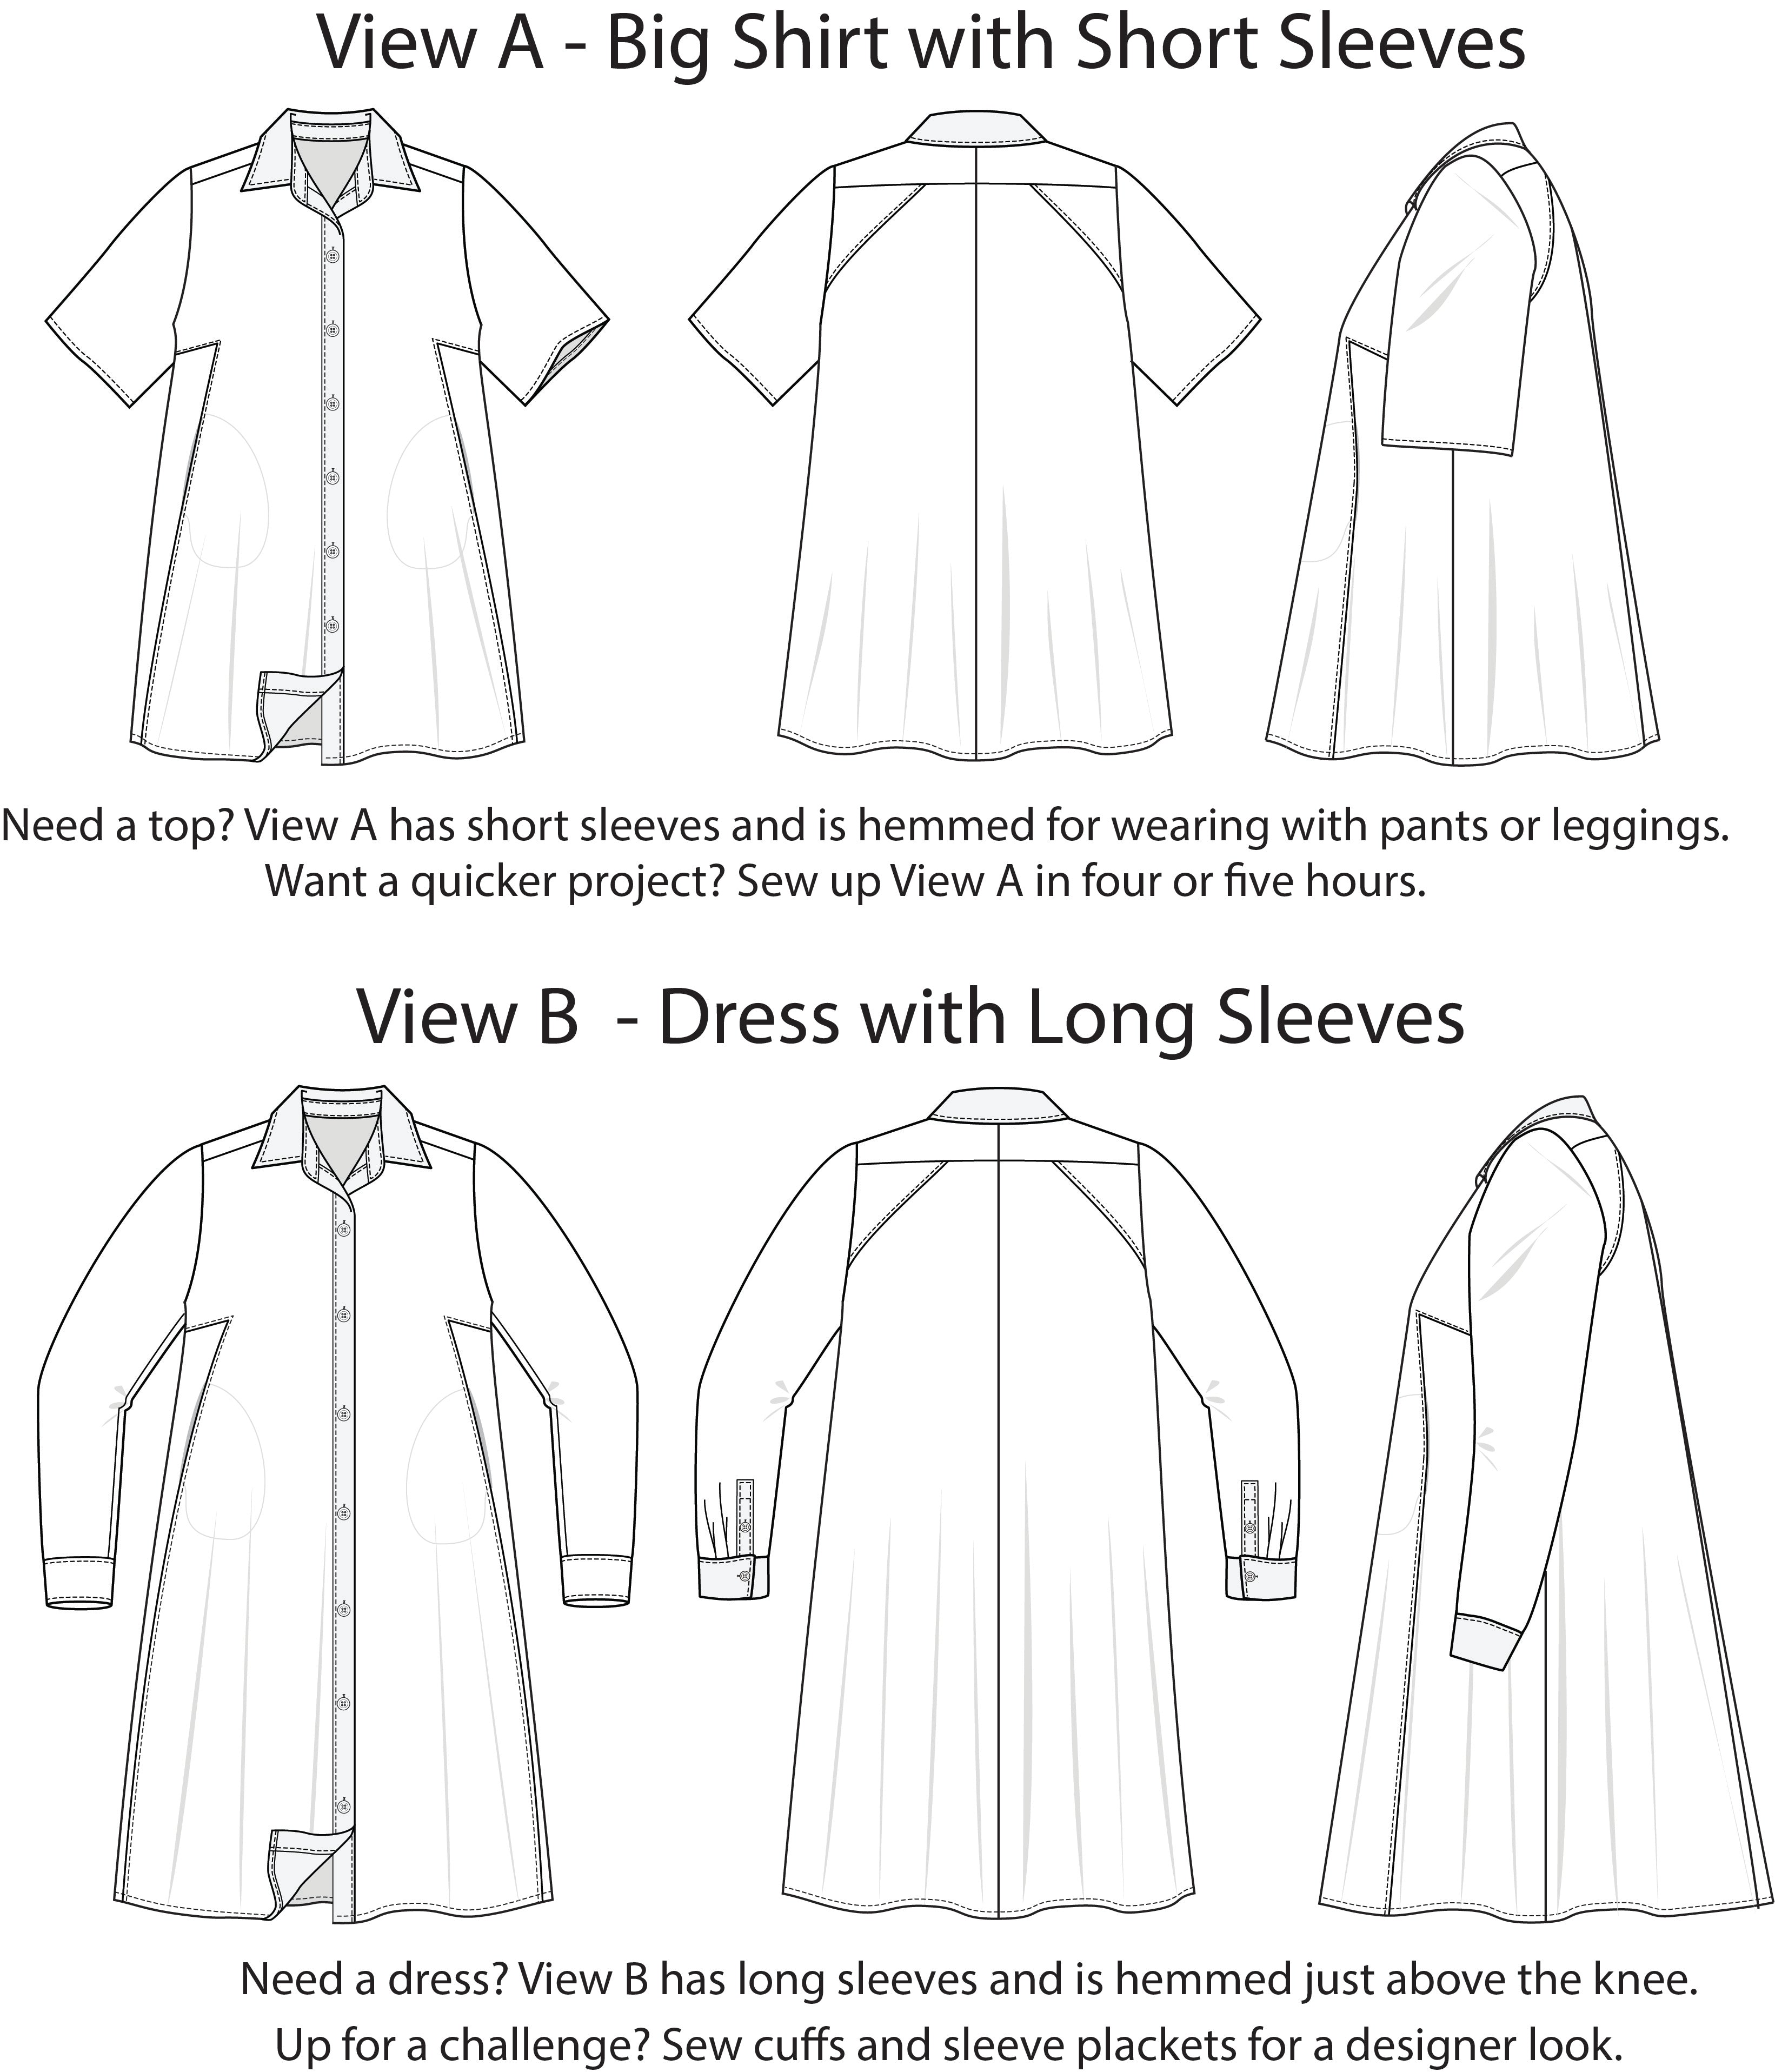 Technical drawings of the Make a Point Dress. View A is a big shirt with short sleeves. View B is a dress with long sleeves, including cuffs and plackets. Both versions have angled princess seams in side panels, concealed front pockets, and a collar and collar stand. On the back, both versions have a split yoke, shoulder panels and a center-back seam.